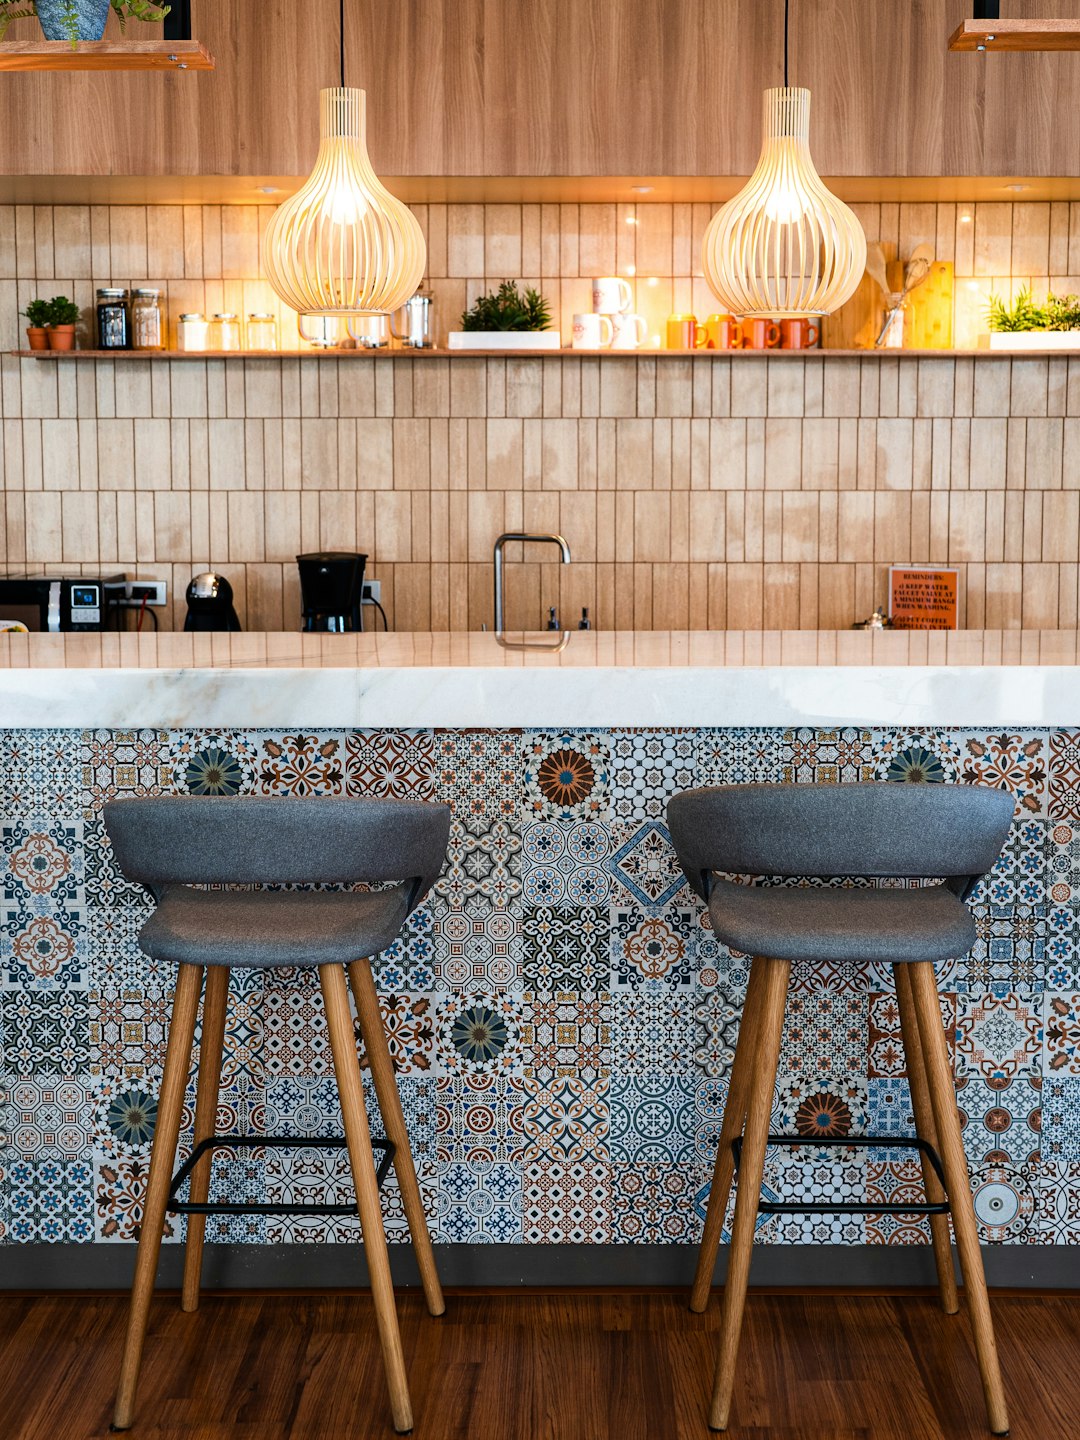 Molly yeh kitchen remodel